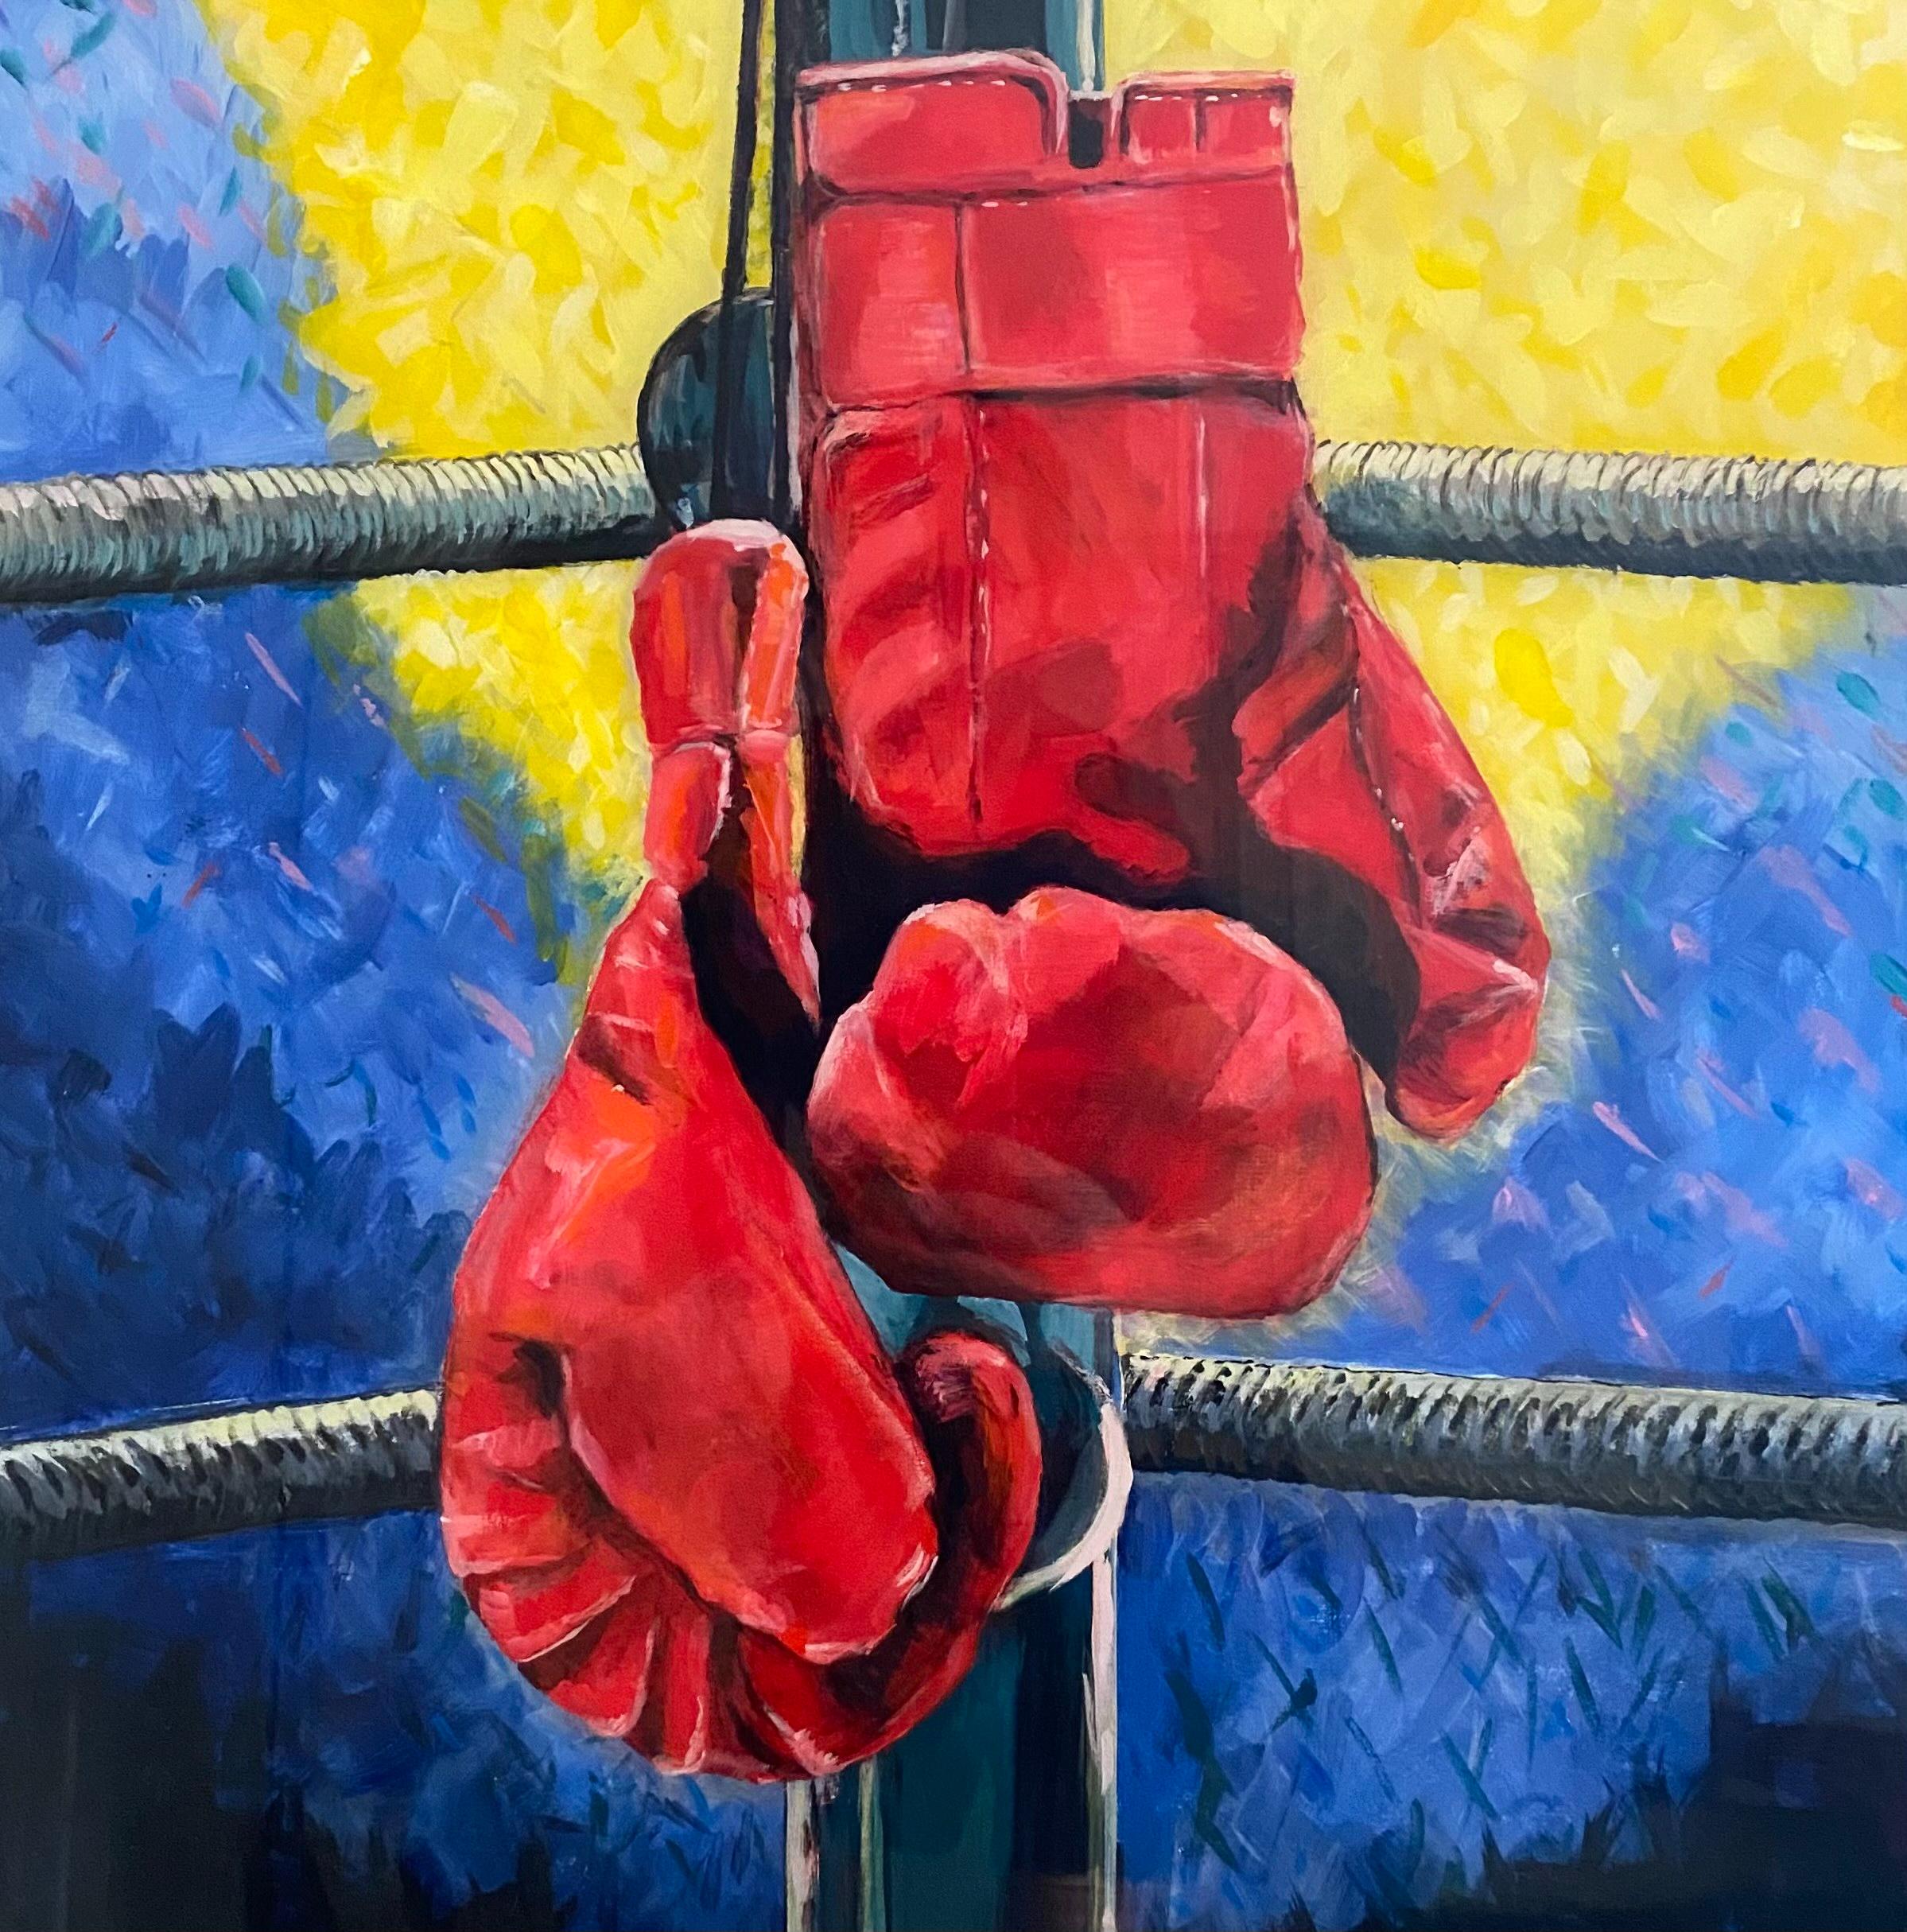 June Arthur Still-Life Painting –  Another Win, Realismus, Acryl mit GalerieWickel mit Harz, Boxhandschuhen, Ringside